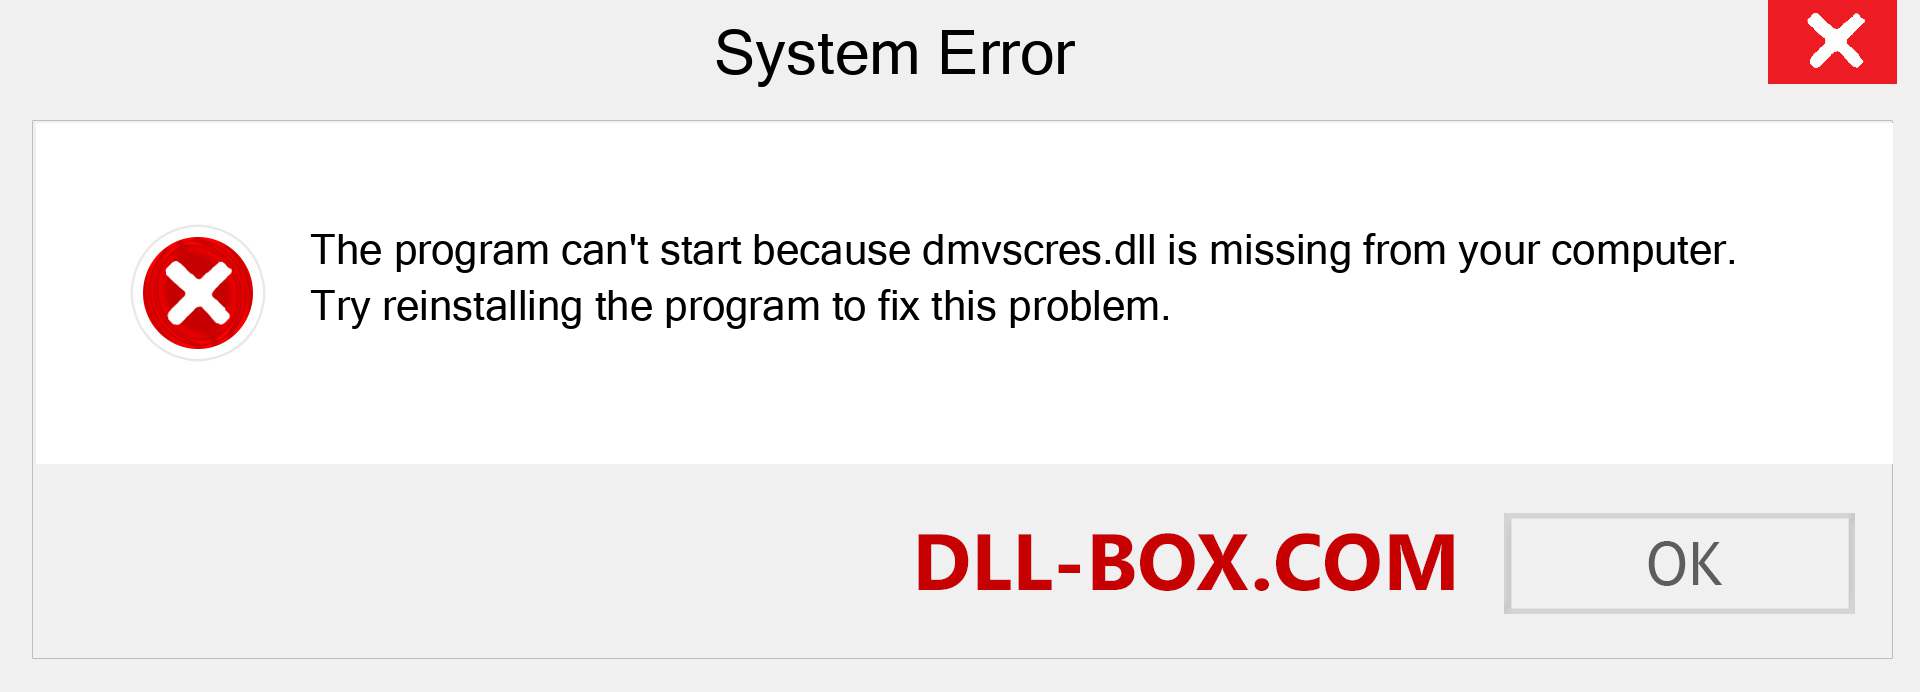  dmvscres.dll file is missing?. Download for Windows 7, 8, 10 - Fix  dmvscres dll Missing Error on Windows, photos, images